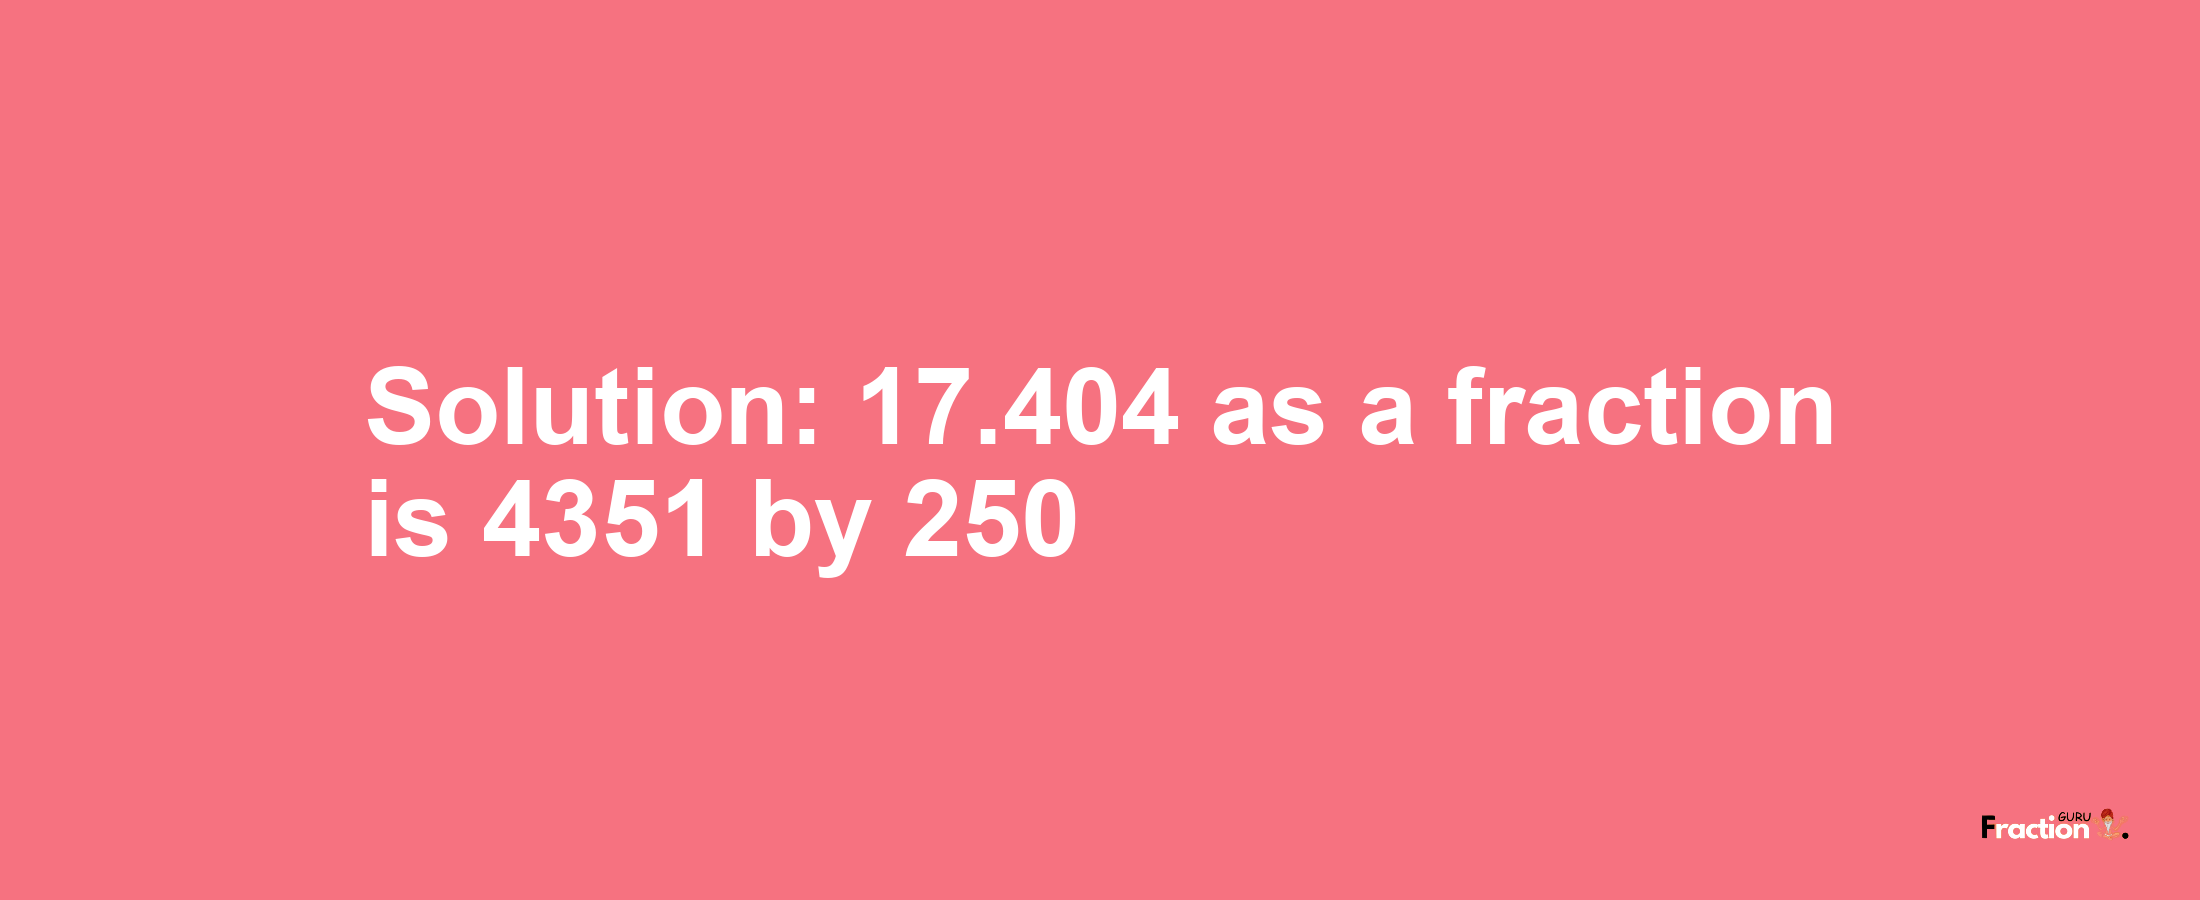 Solution:17.404 as a fraction is 4351/250